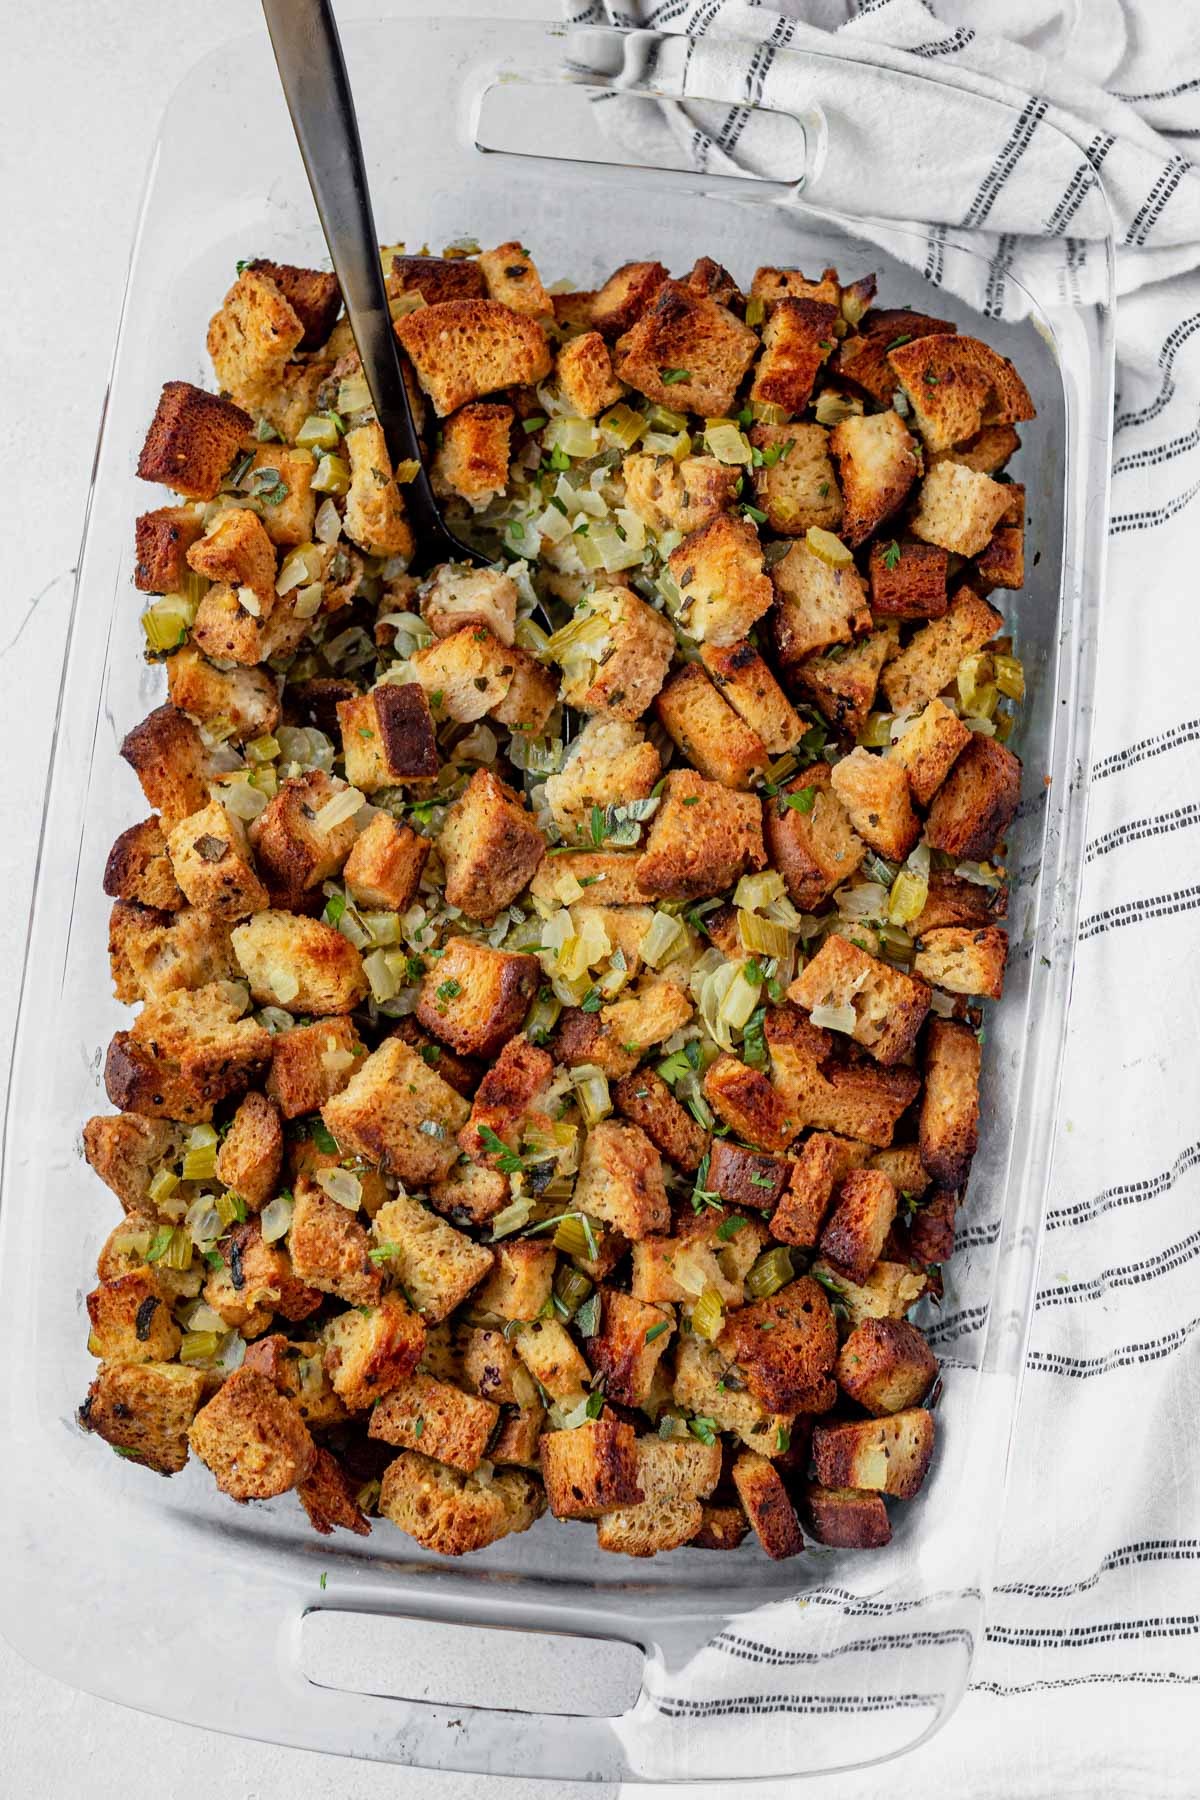 gluten free stuffing in a 9x13 glass dish with a serving spoon